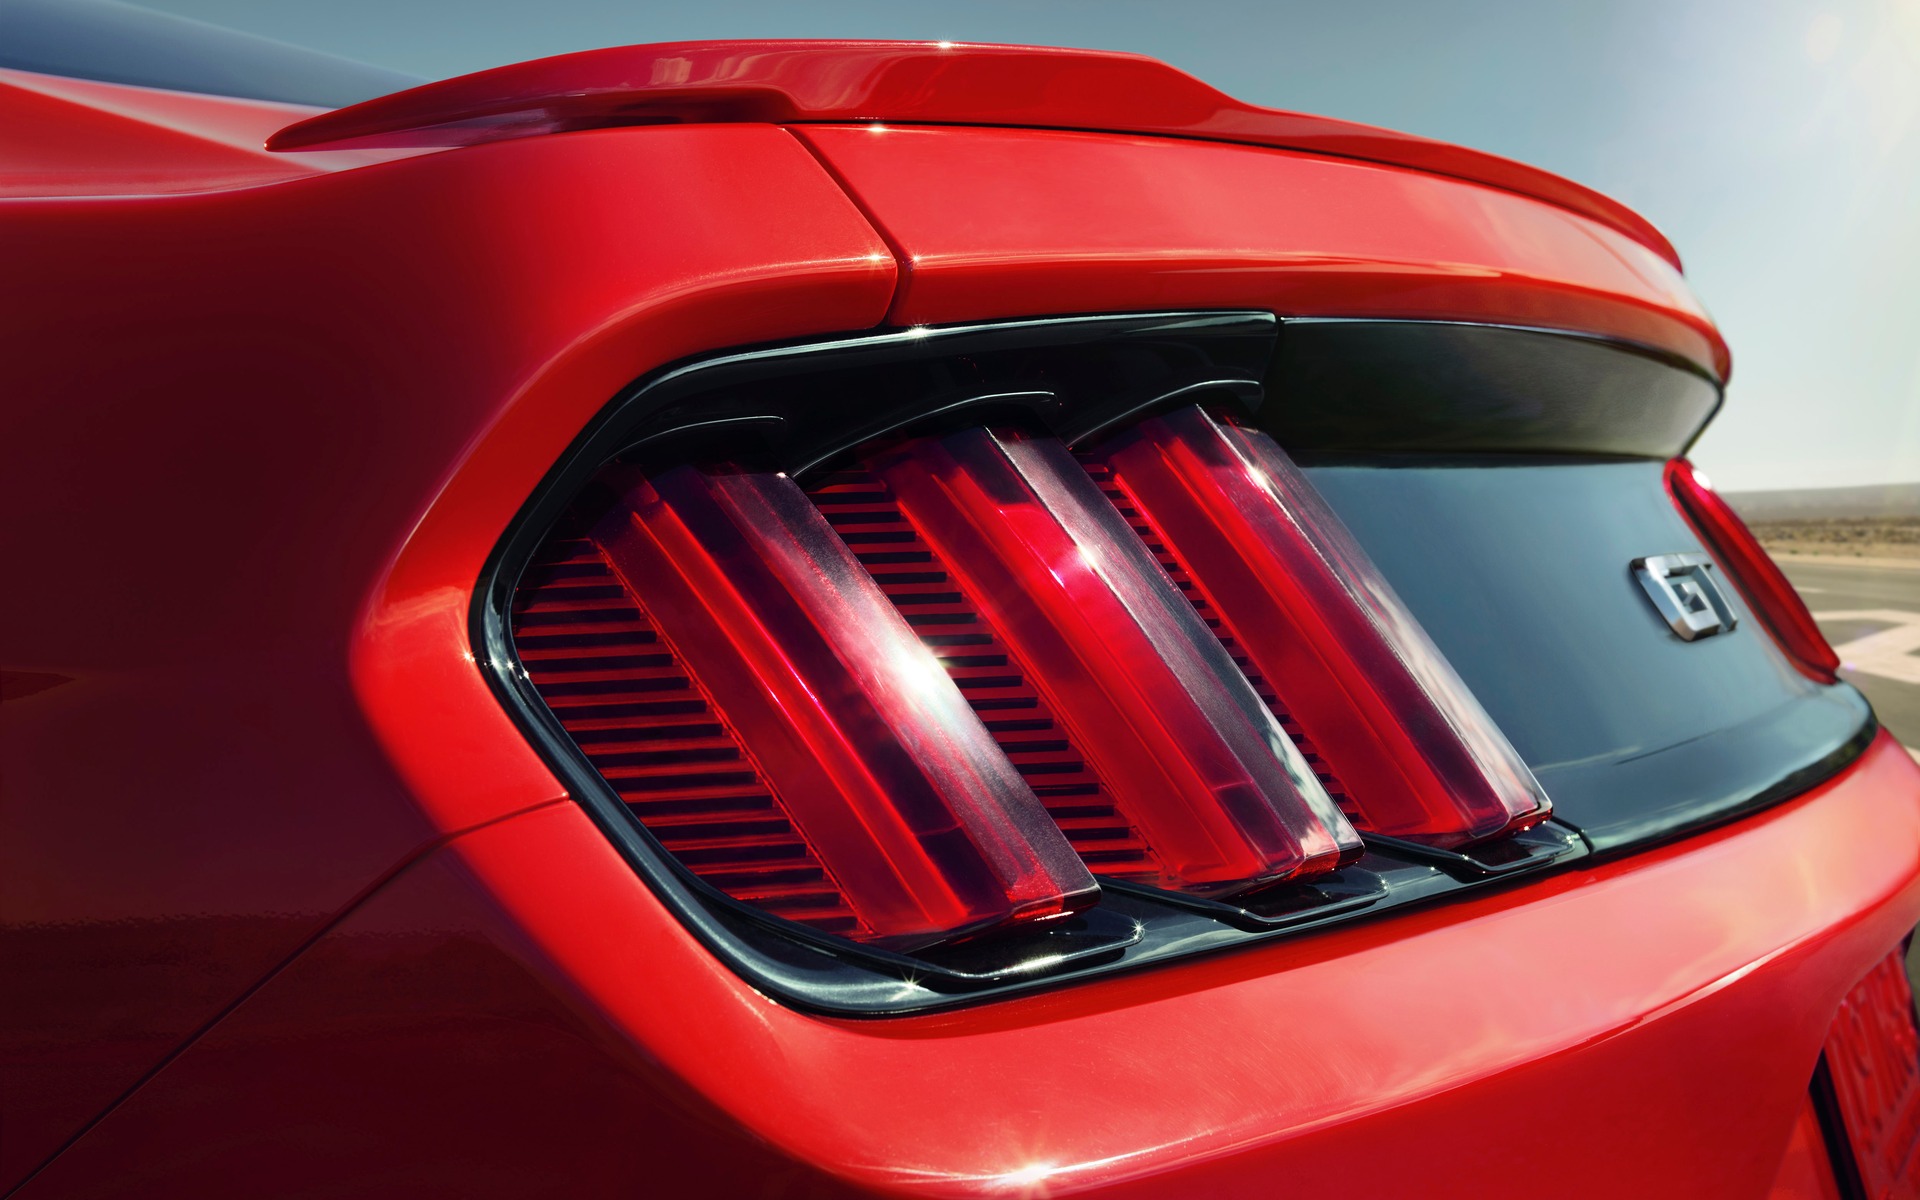 2015 Ford Mustang GT Coupe - Tri-bar taillights